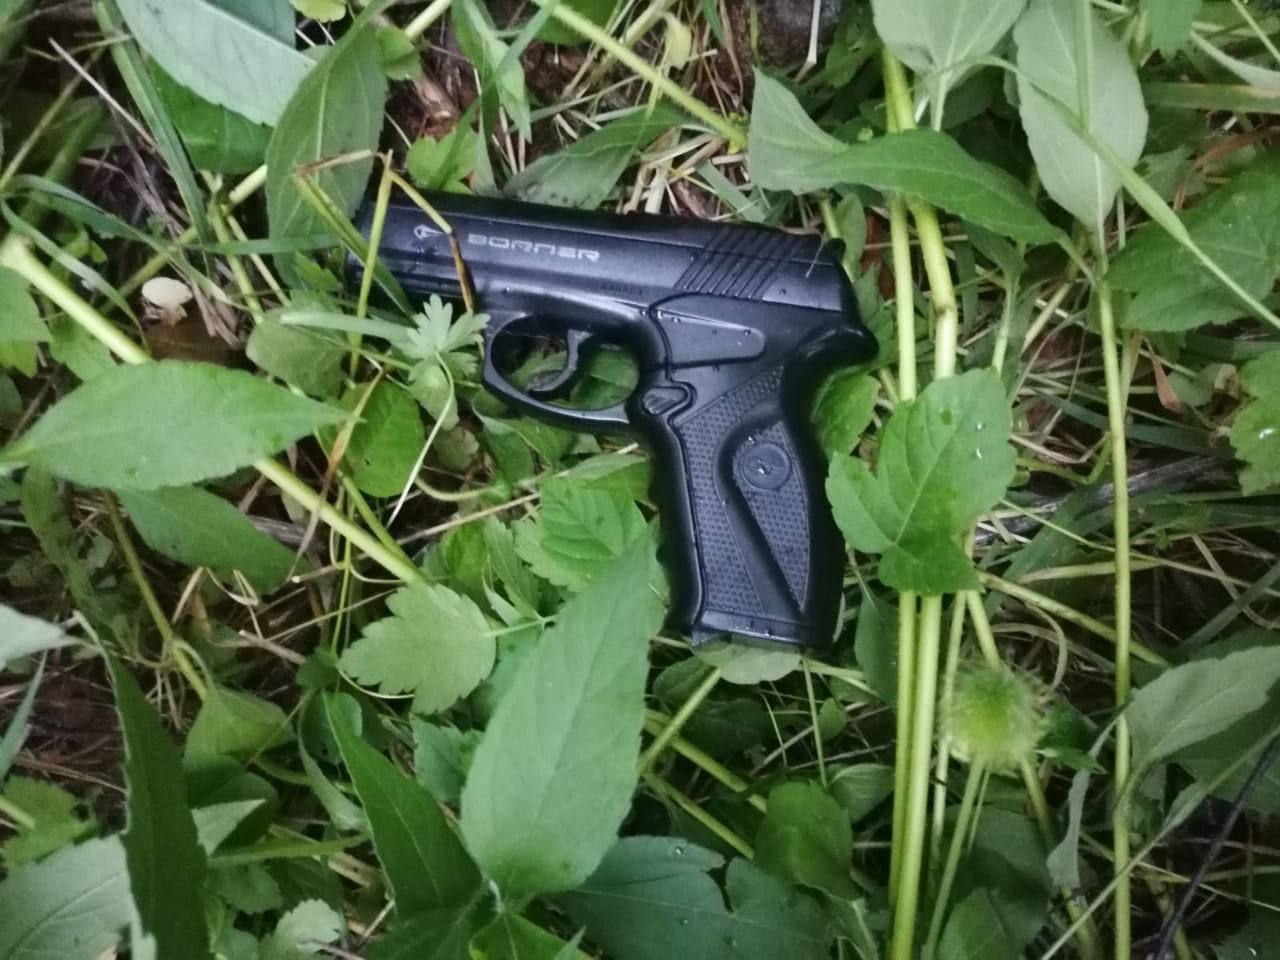 Air pistol found on the robber